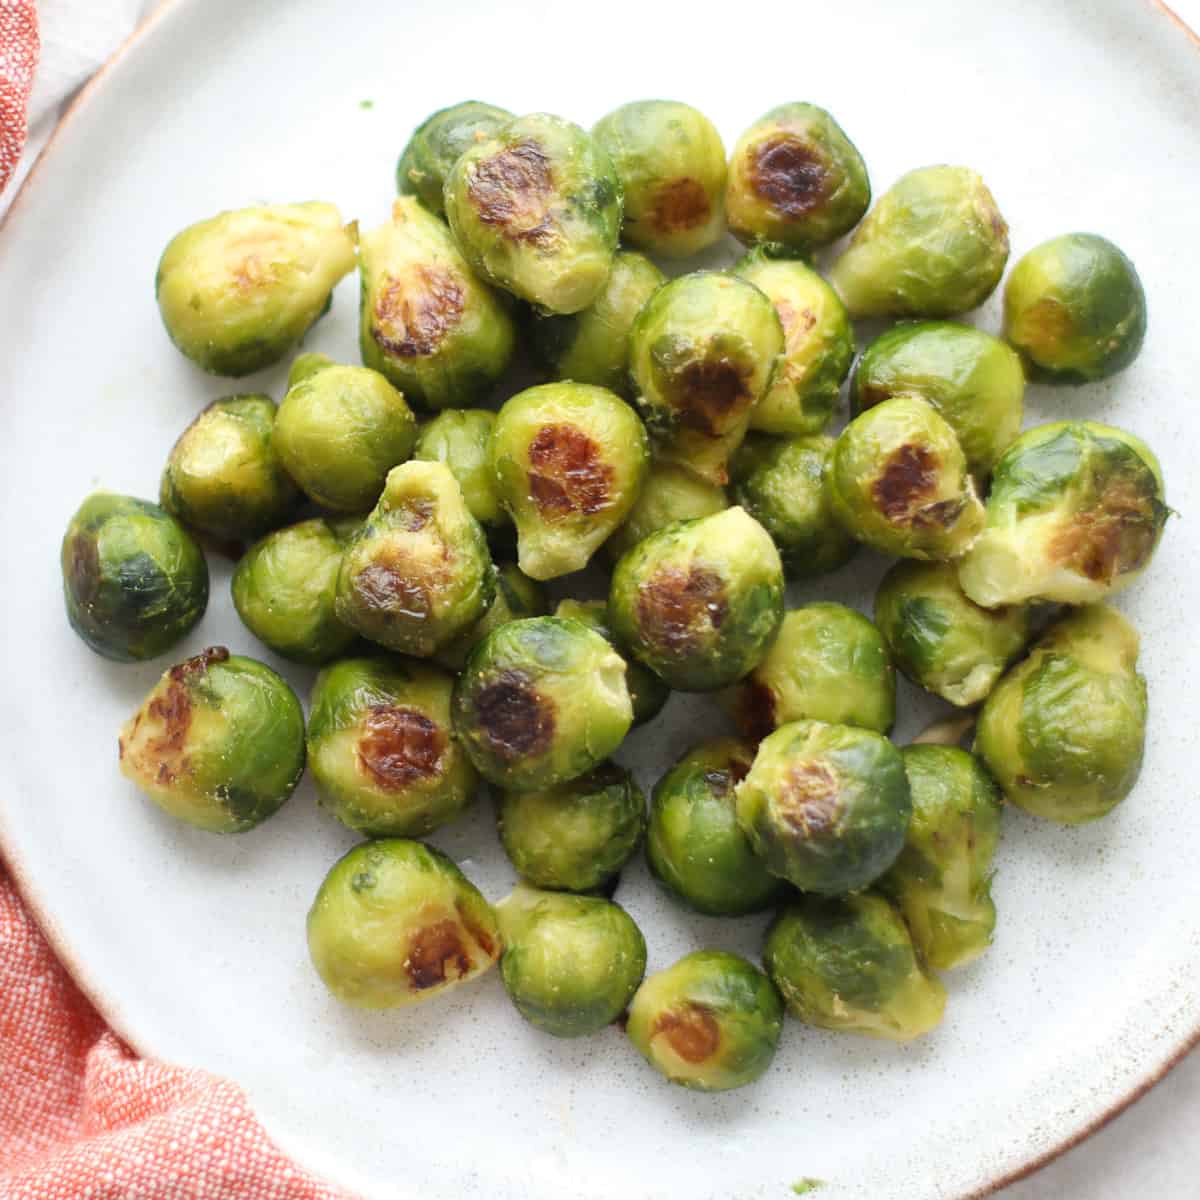 https://www.mjandhungryman.com/wp-content/uploads/2023/02/Frozen-Brussels-sprouts.jpg